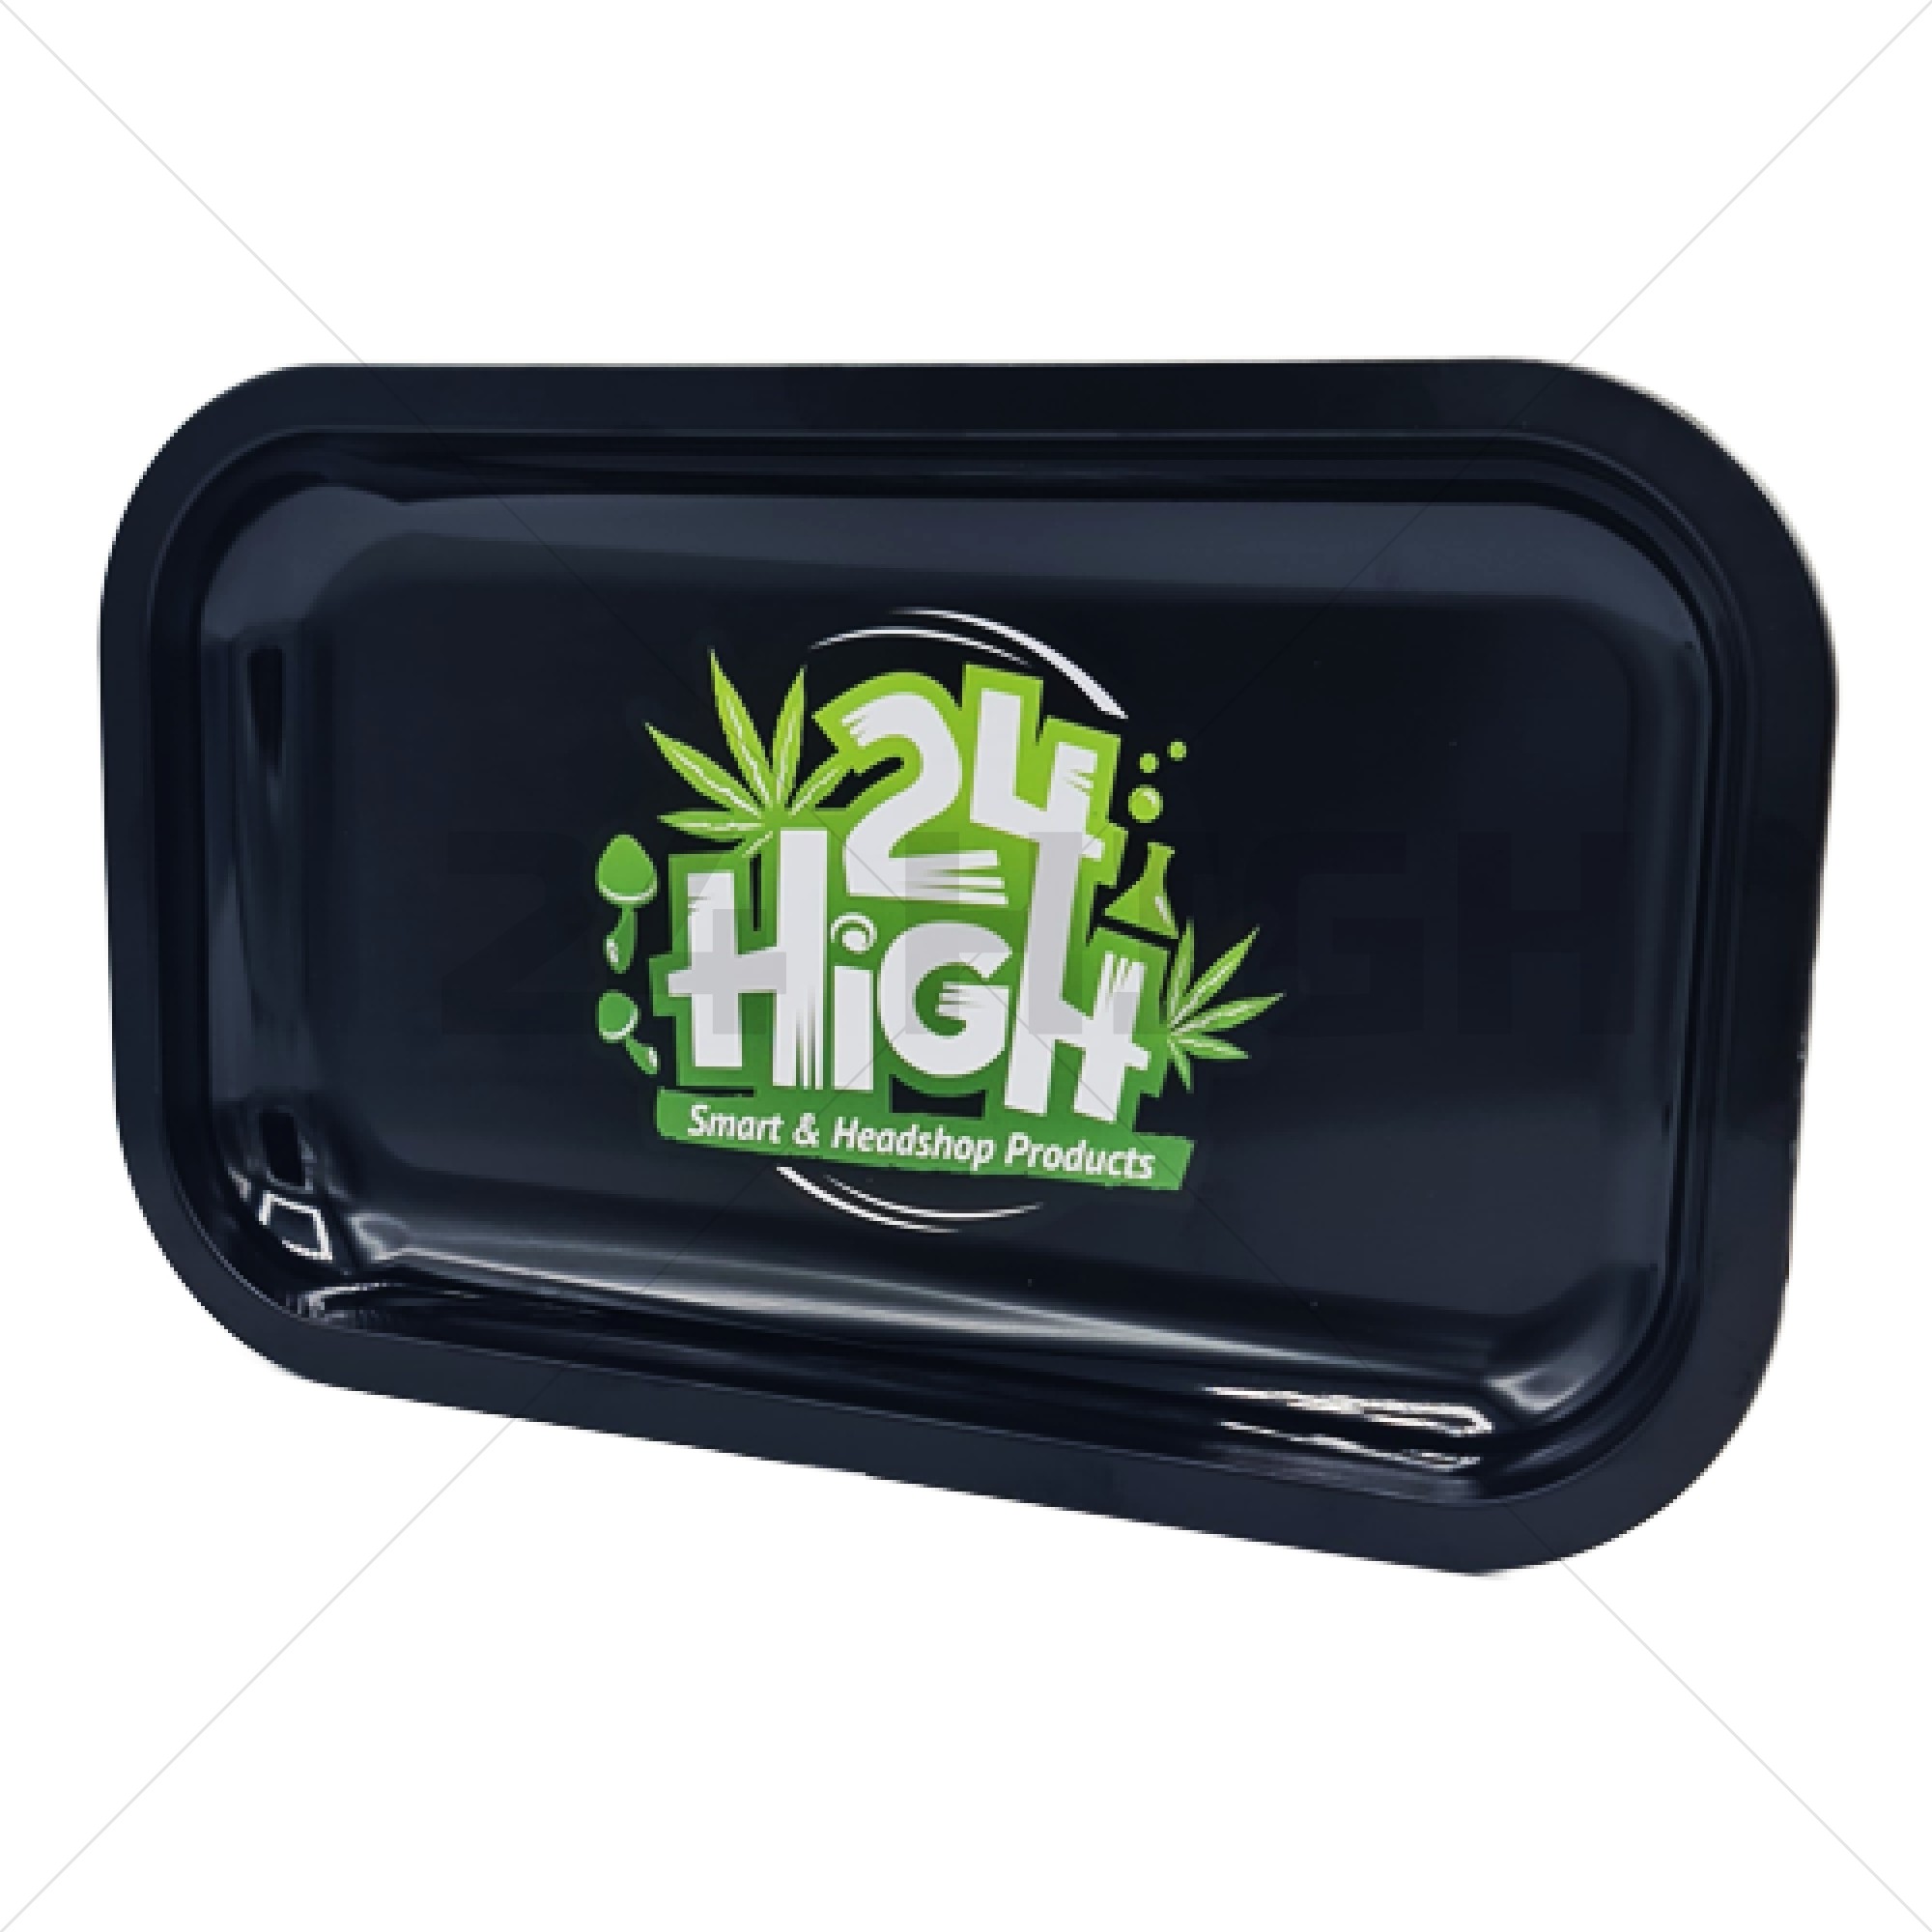 24HIGH Metal Rolling Tray Large